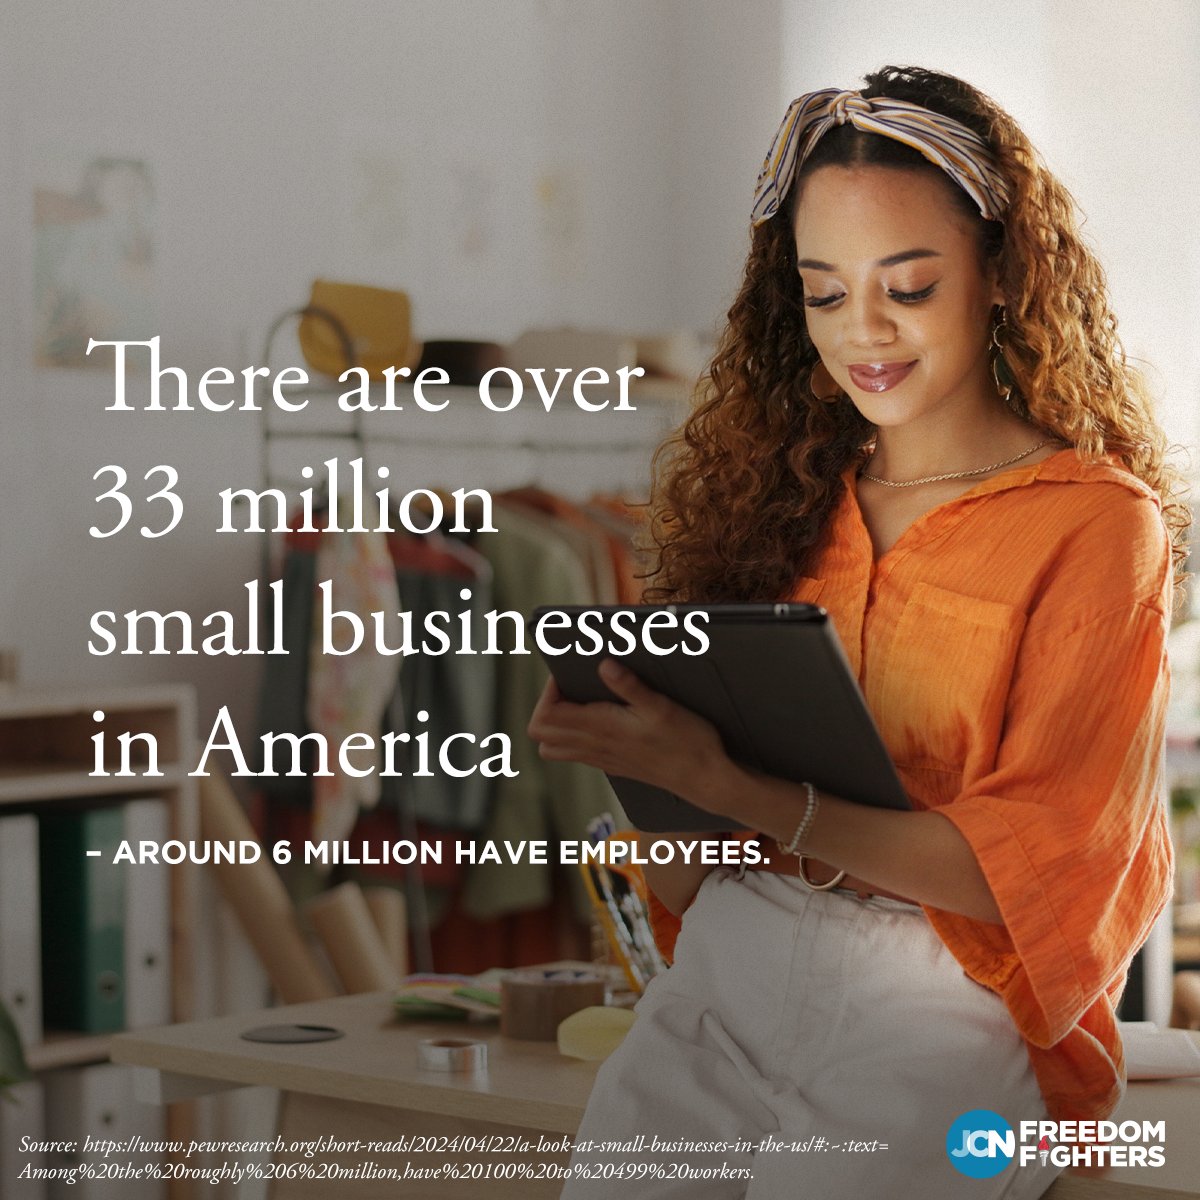 It’s #NationalSmallBusinessWeek, a time to honor the countless small businesses that form the backbone of the American economy. If you’re a small business owner, we invite you to proudly share your business in the comments!